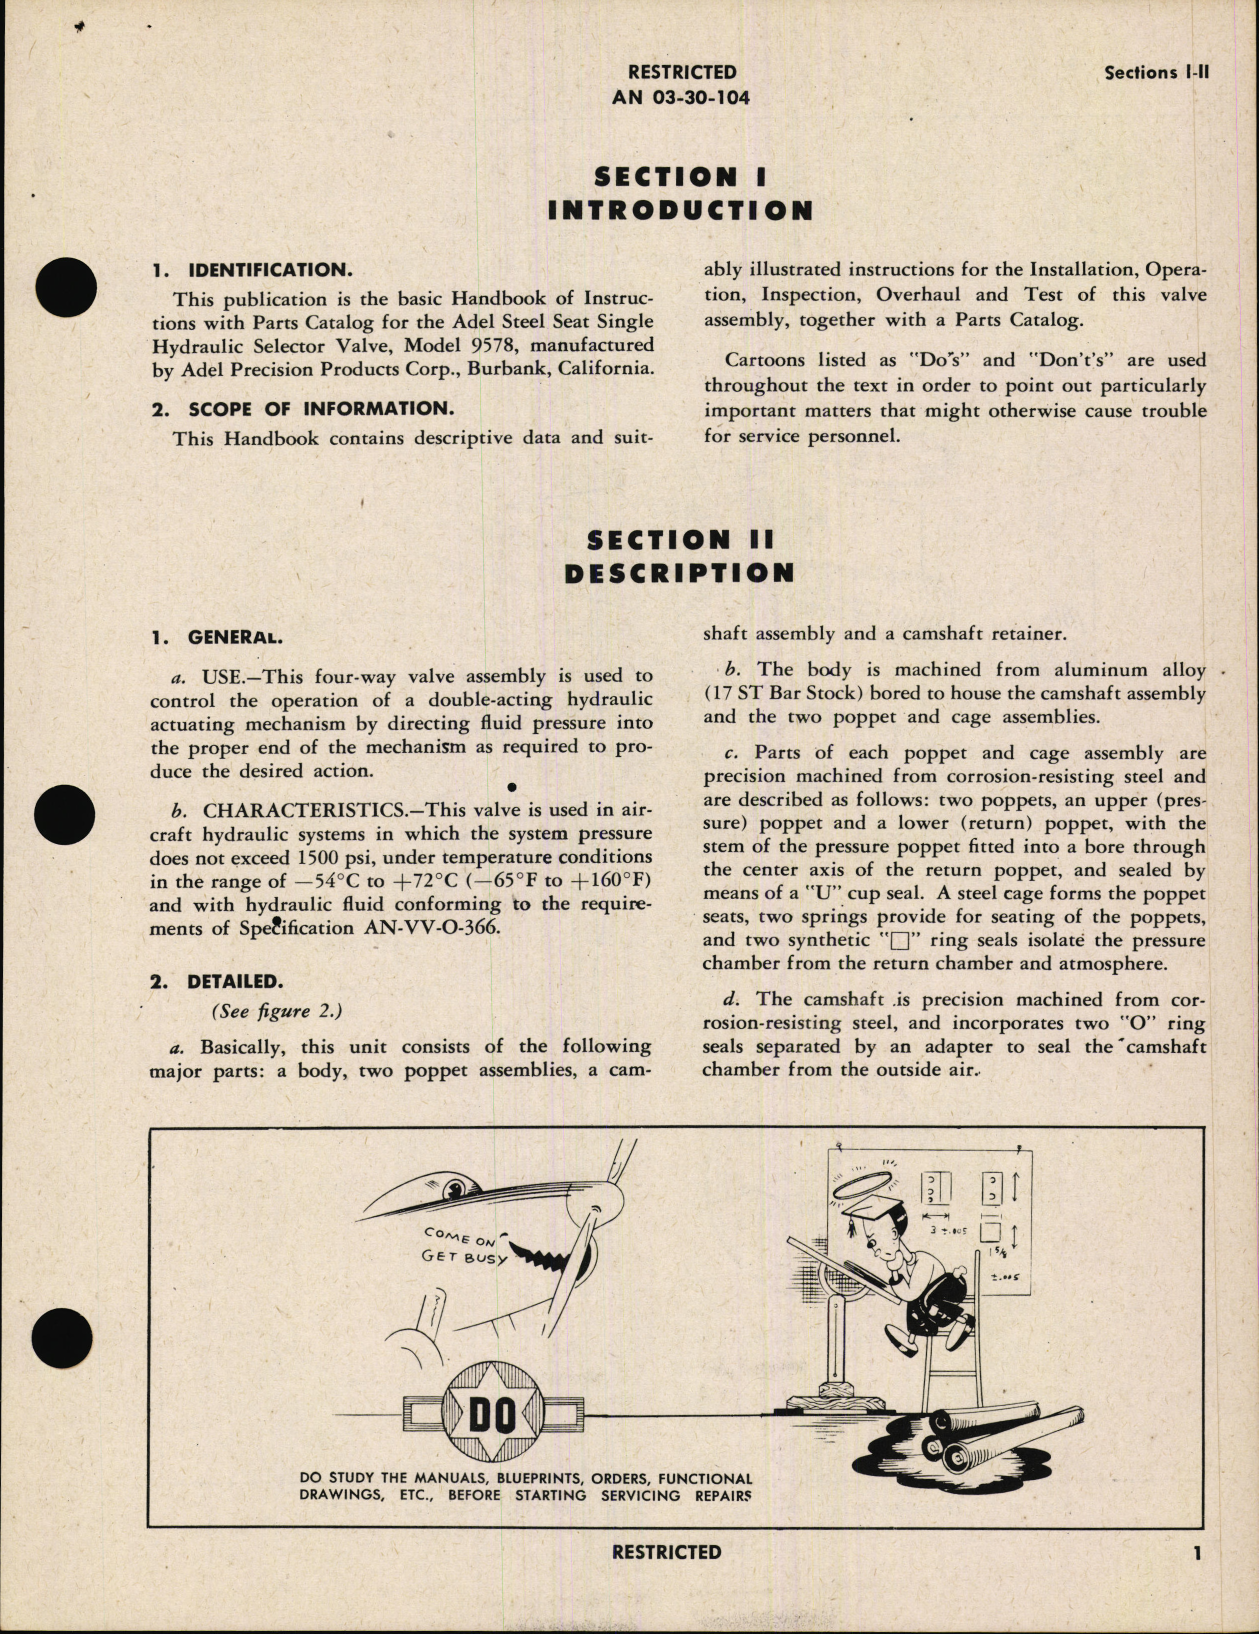 Sample page 5 from AirCorps Library document: Handbook of Instructions with Parts Catalog for Steel Seat Hydraulic Selector Valve Model 9578